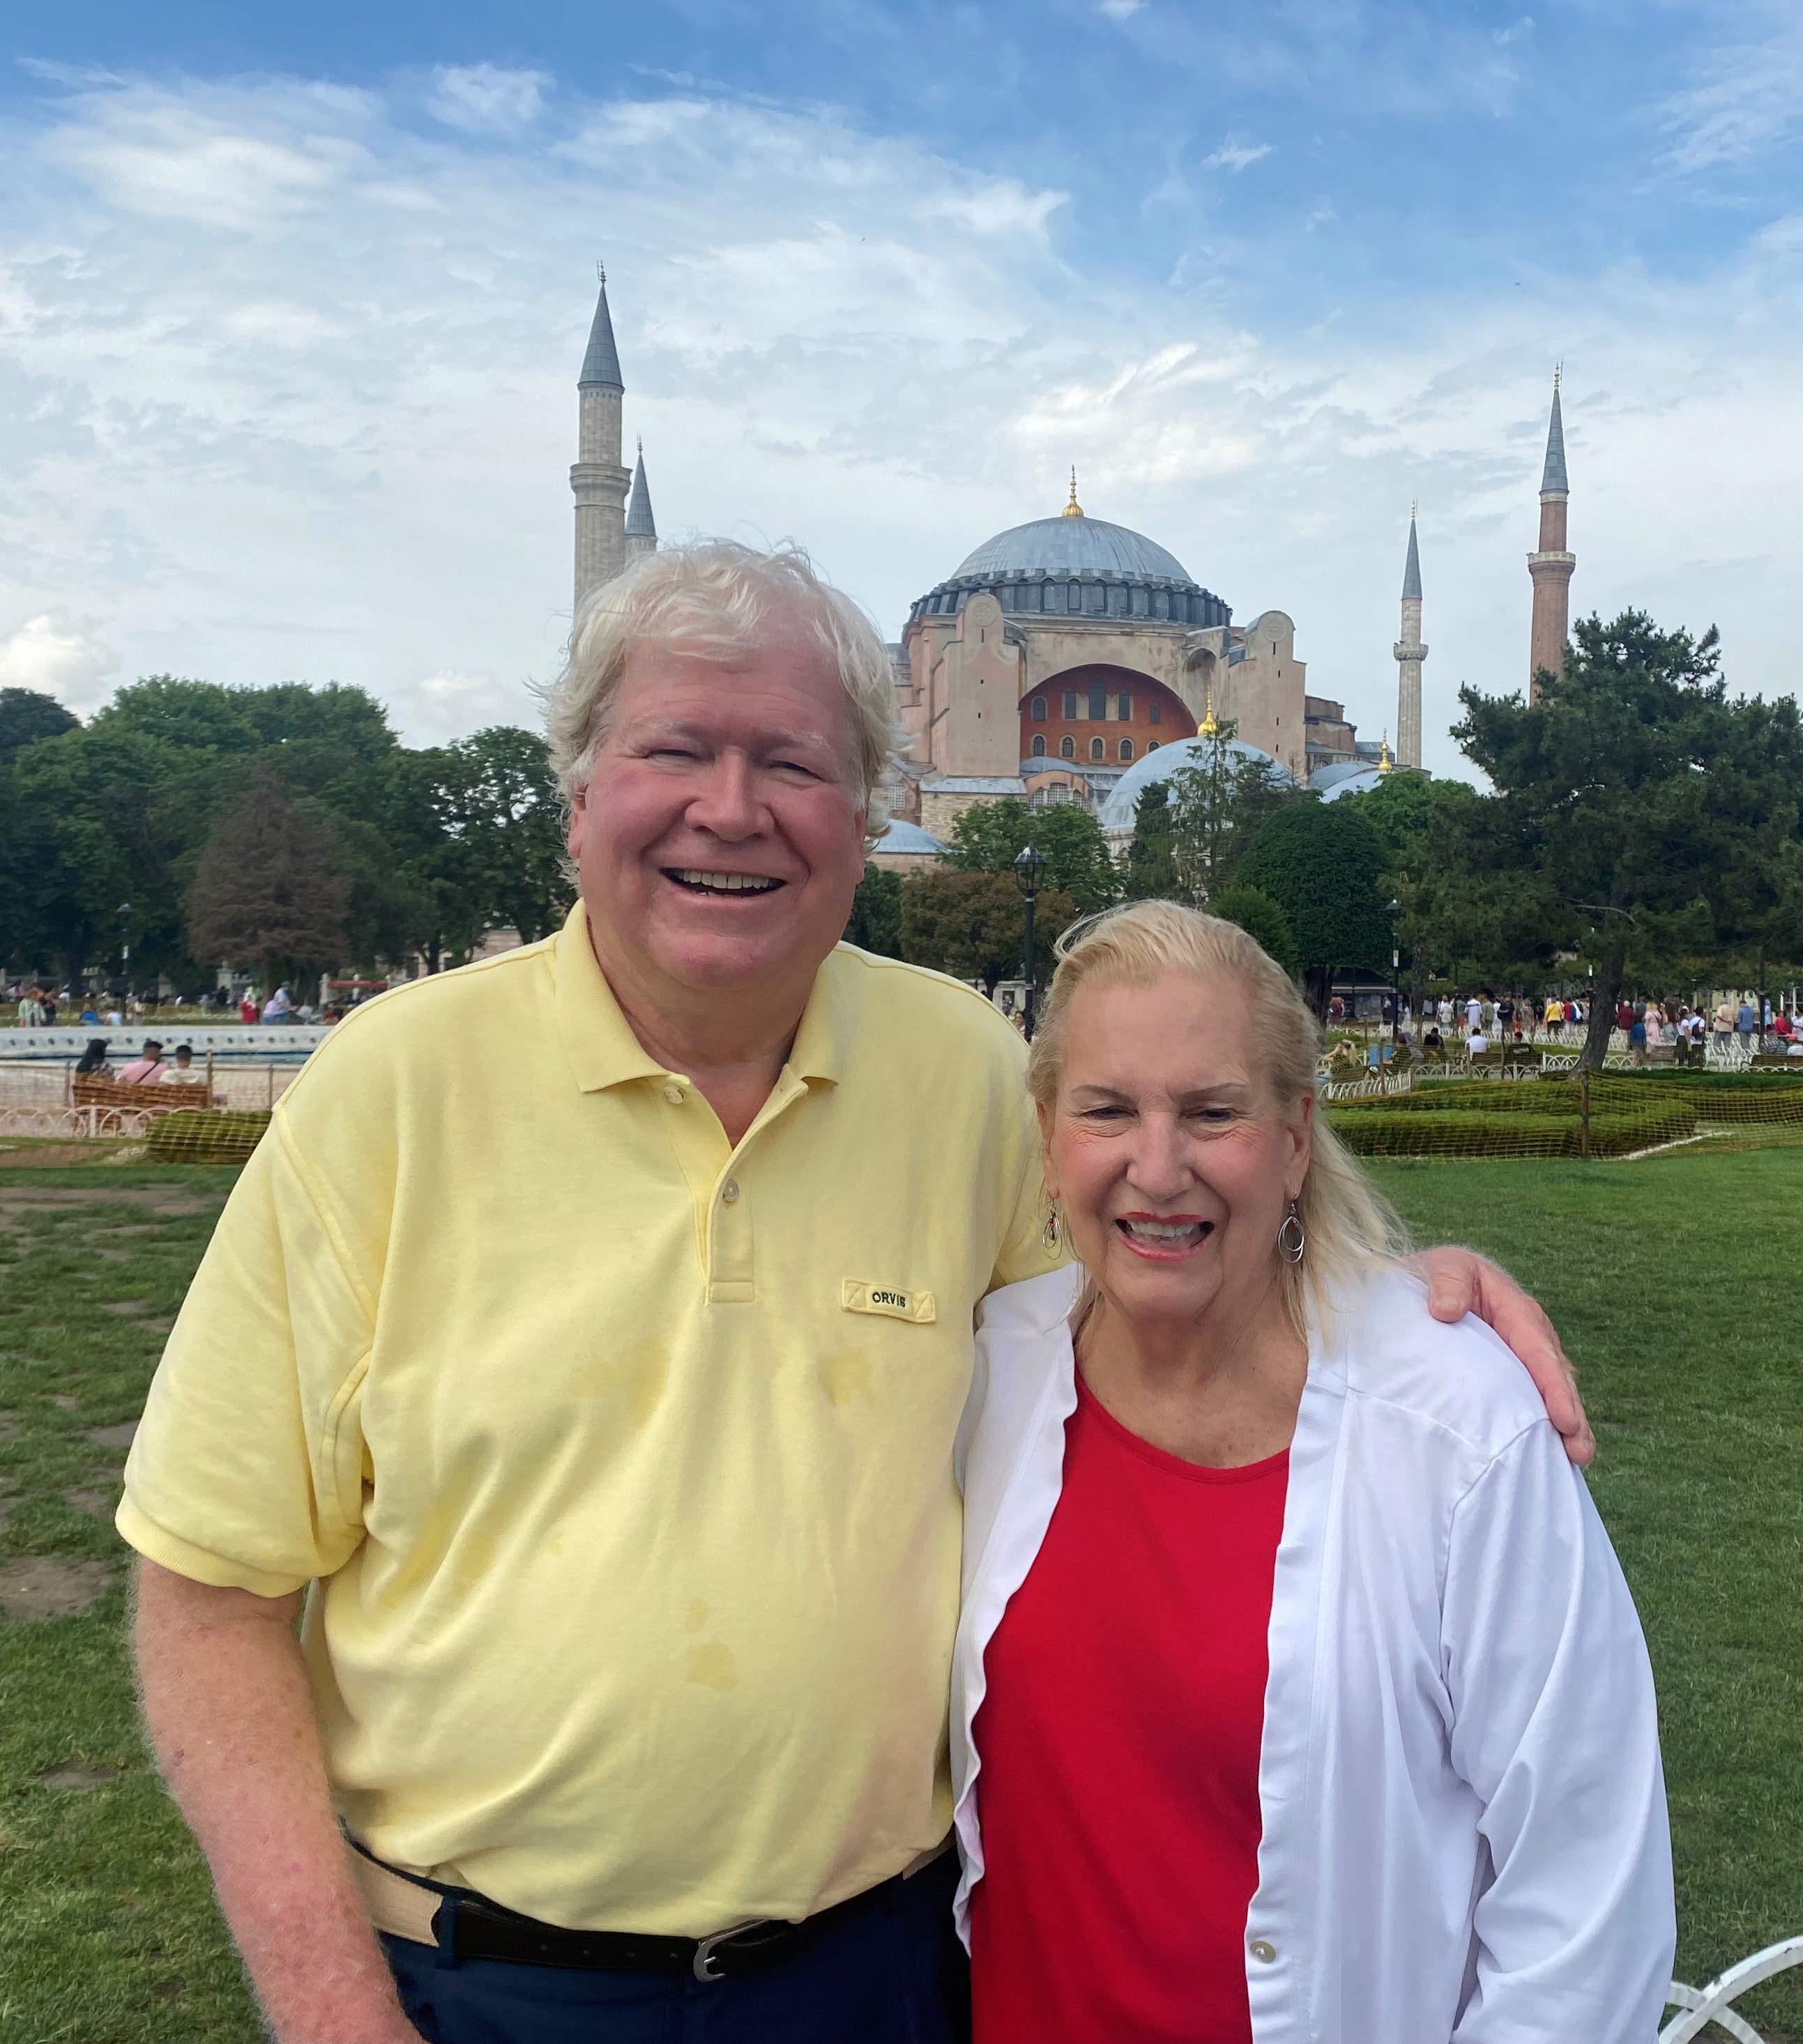 David and Kak McKinnie in front of the Blue Mosque, Istanbul, Turkey, June 2022